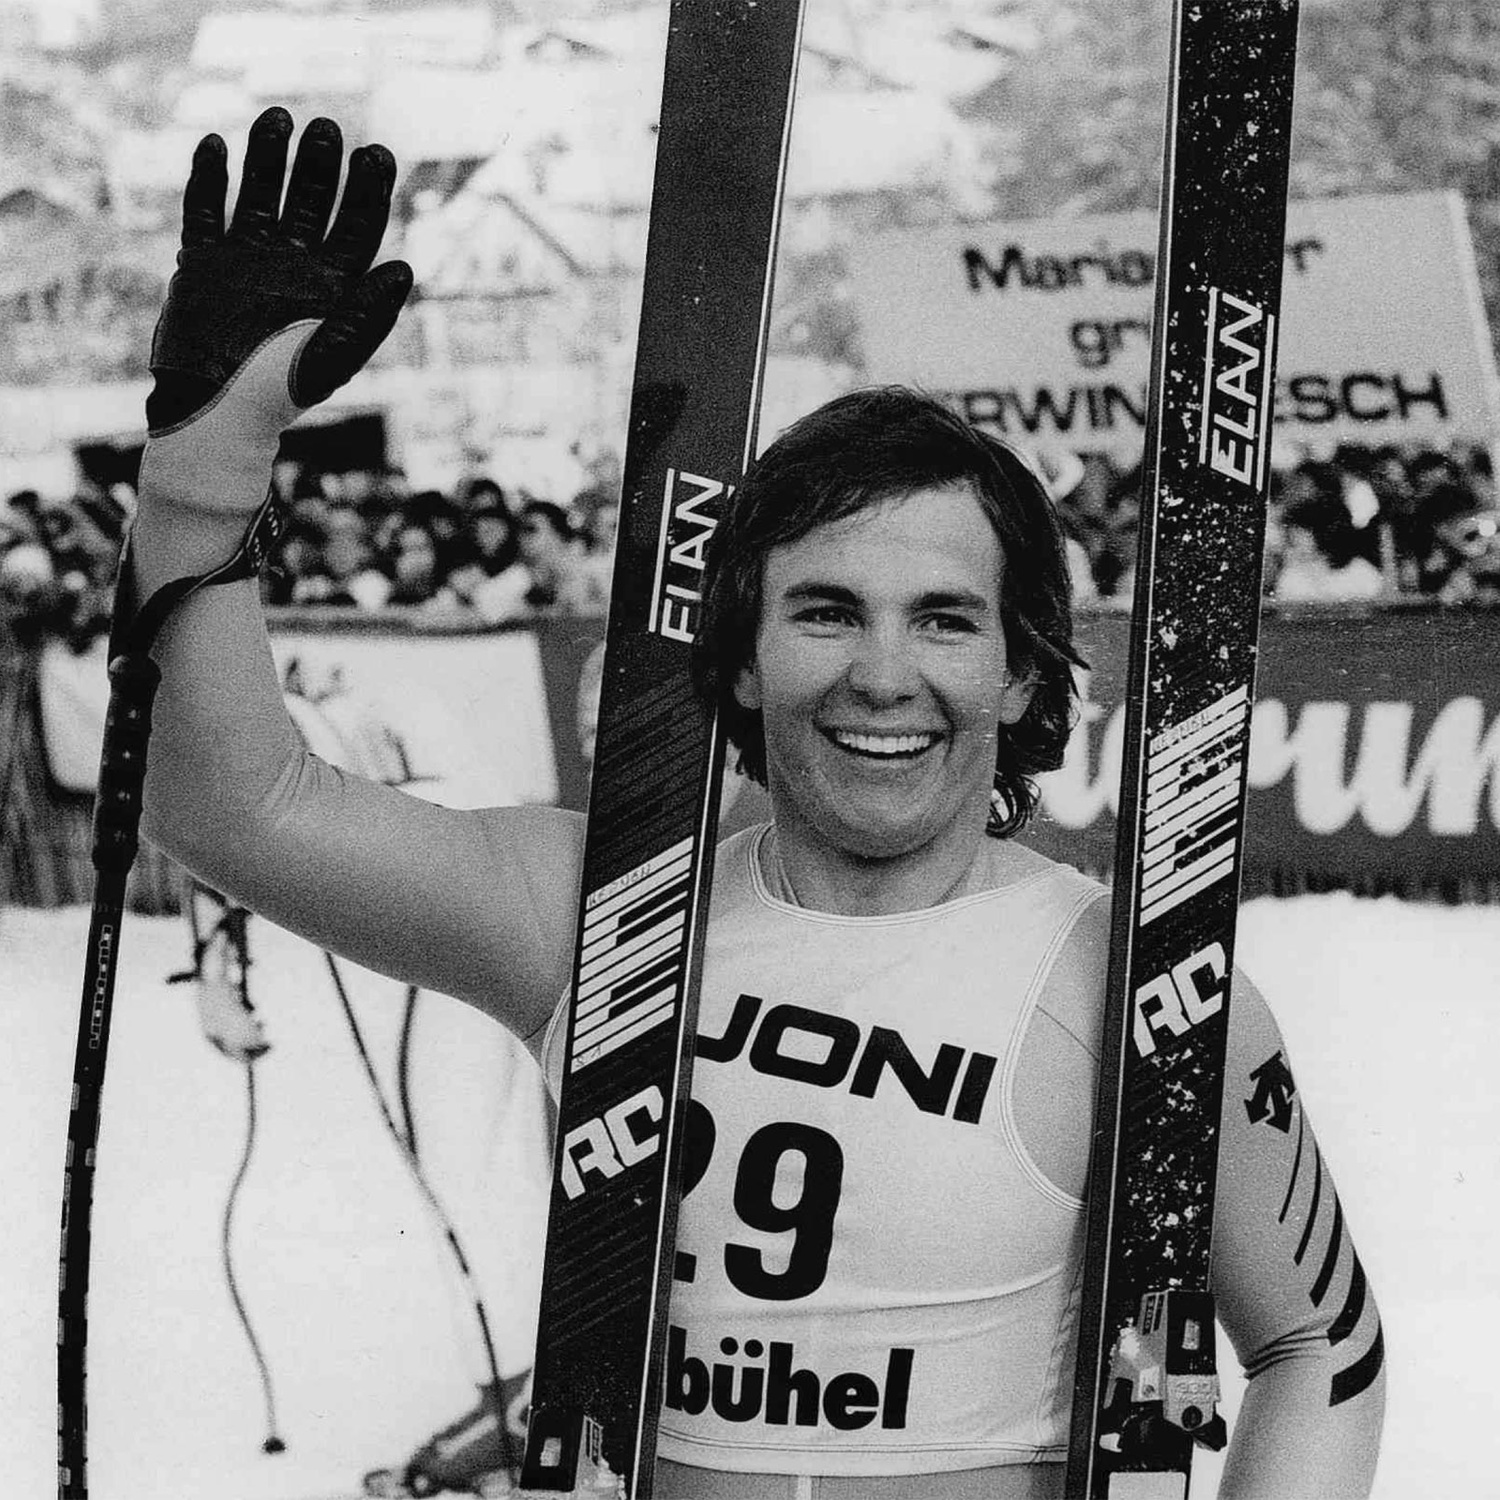 Get your skis on with Bruno Kernen